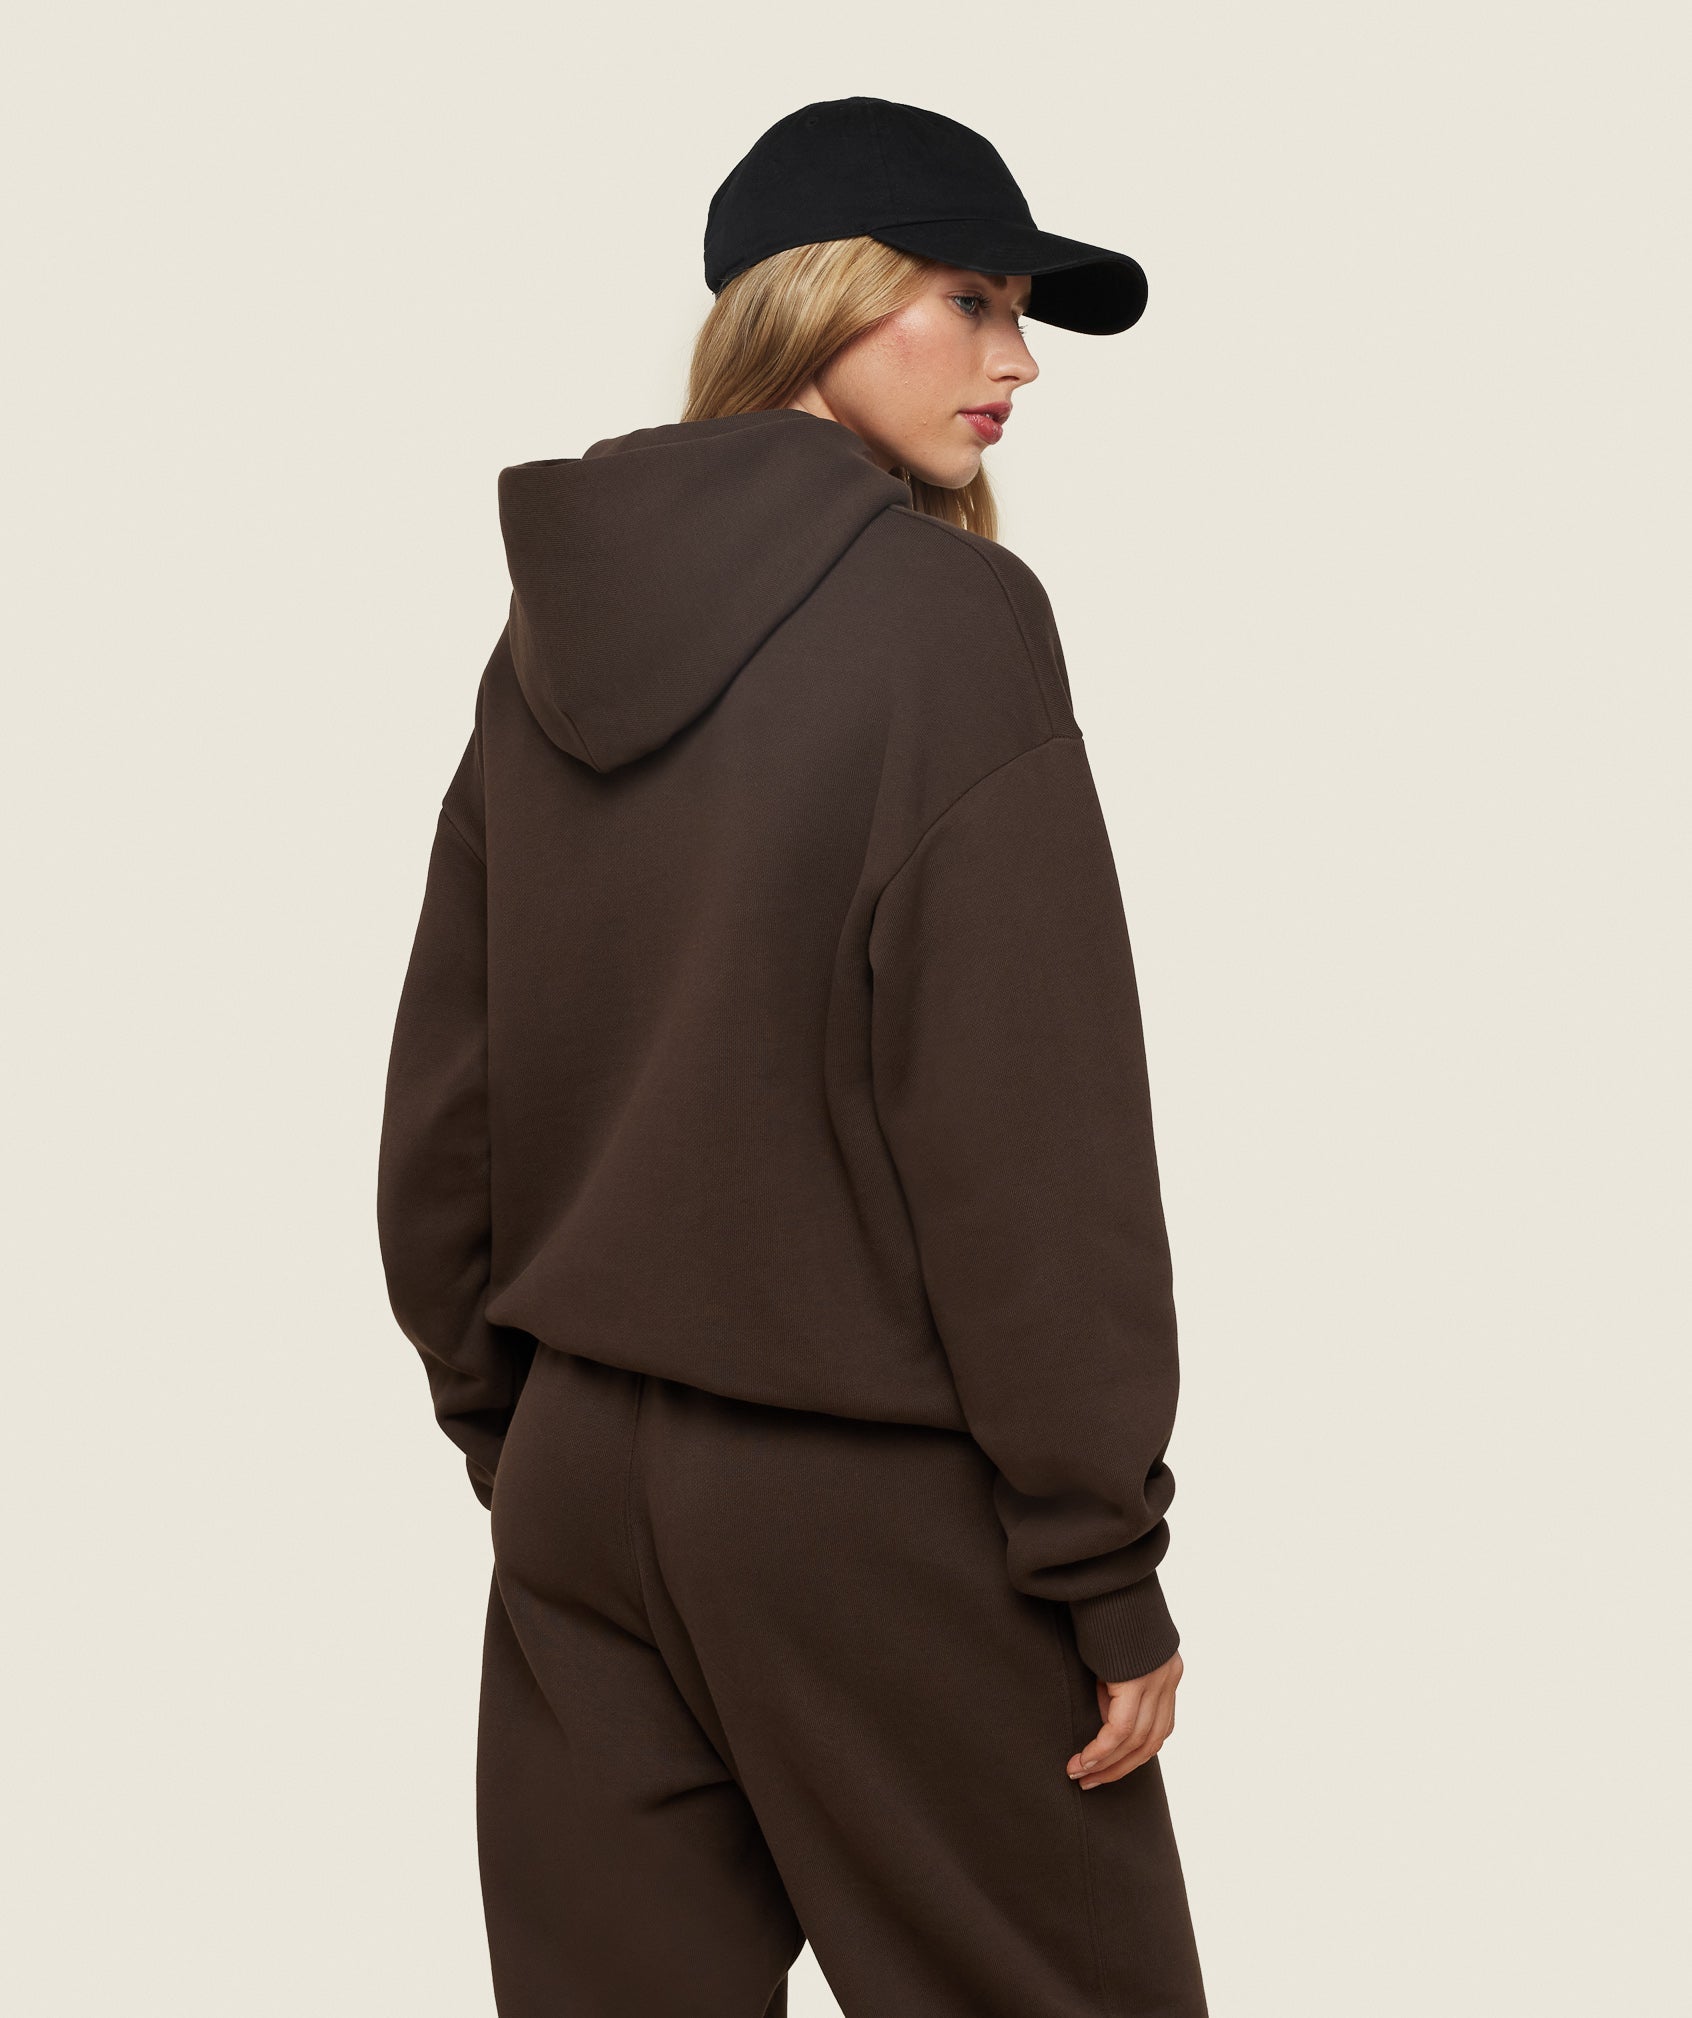 Phys Ed Graphic Hoodie in Archive Brown - view 5